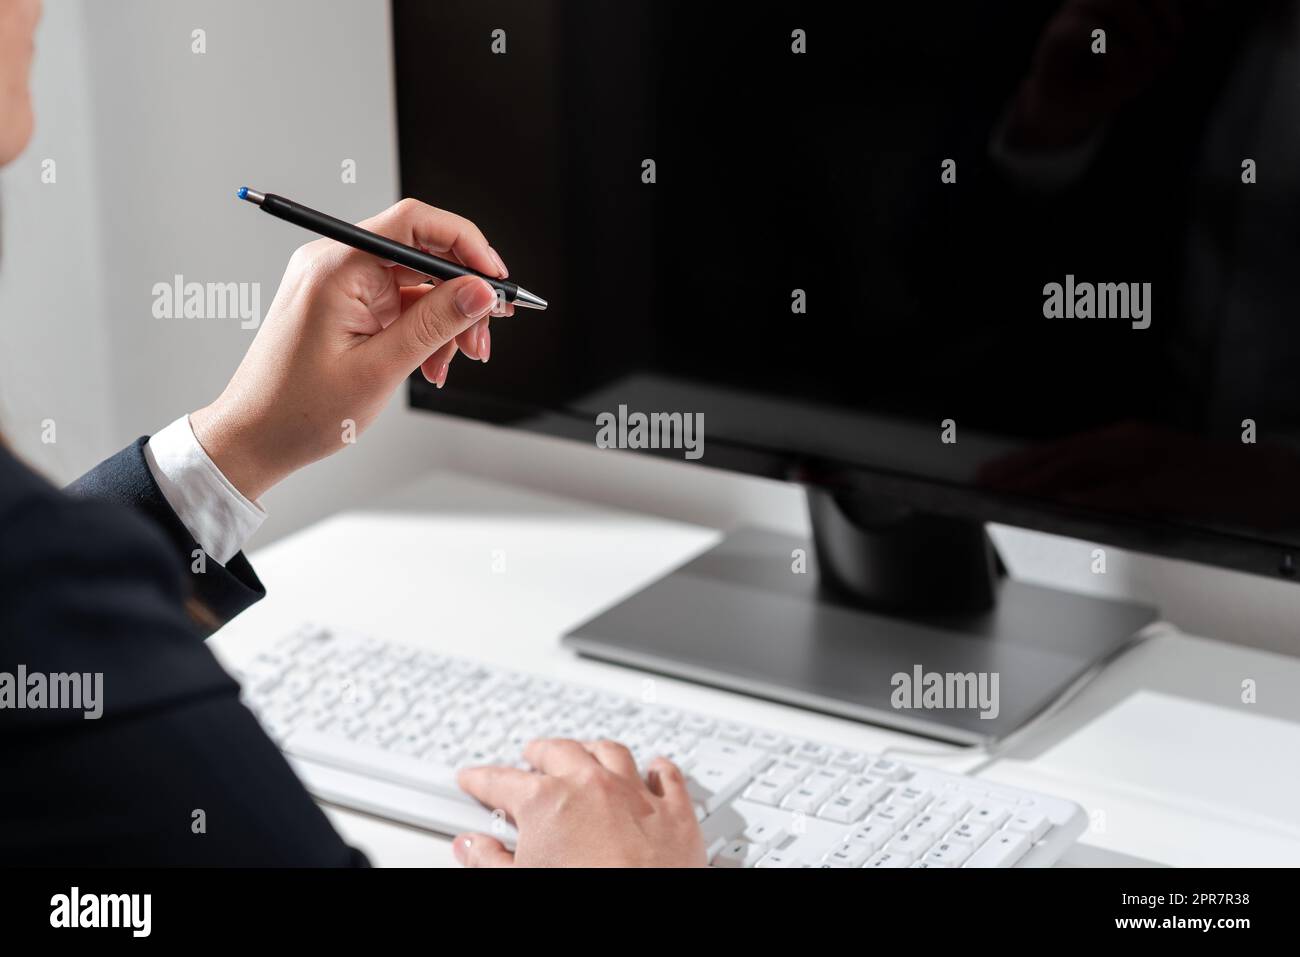 Businesswoman Typing Recent Updates On Lap Top Keyboard On Desk And Pointing Important Ideas With Pen. Woman In Office Writing Late Messages On Computer. Stock Photo